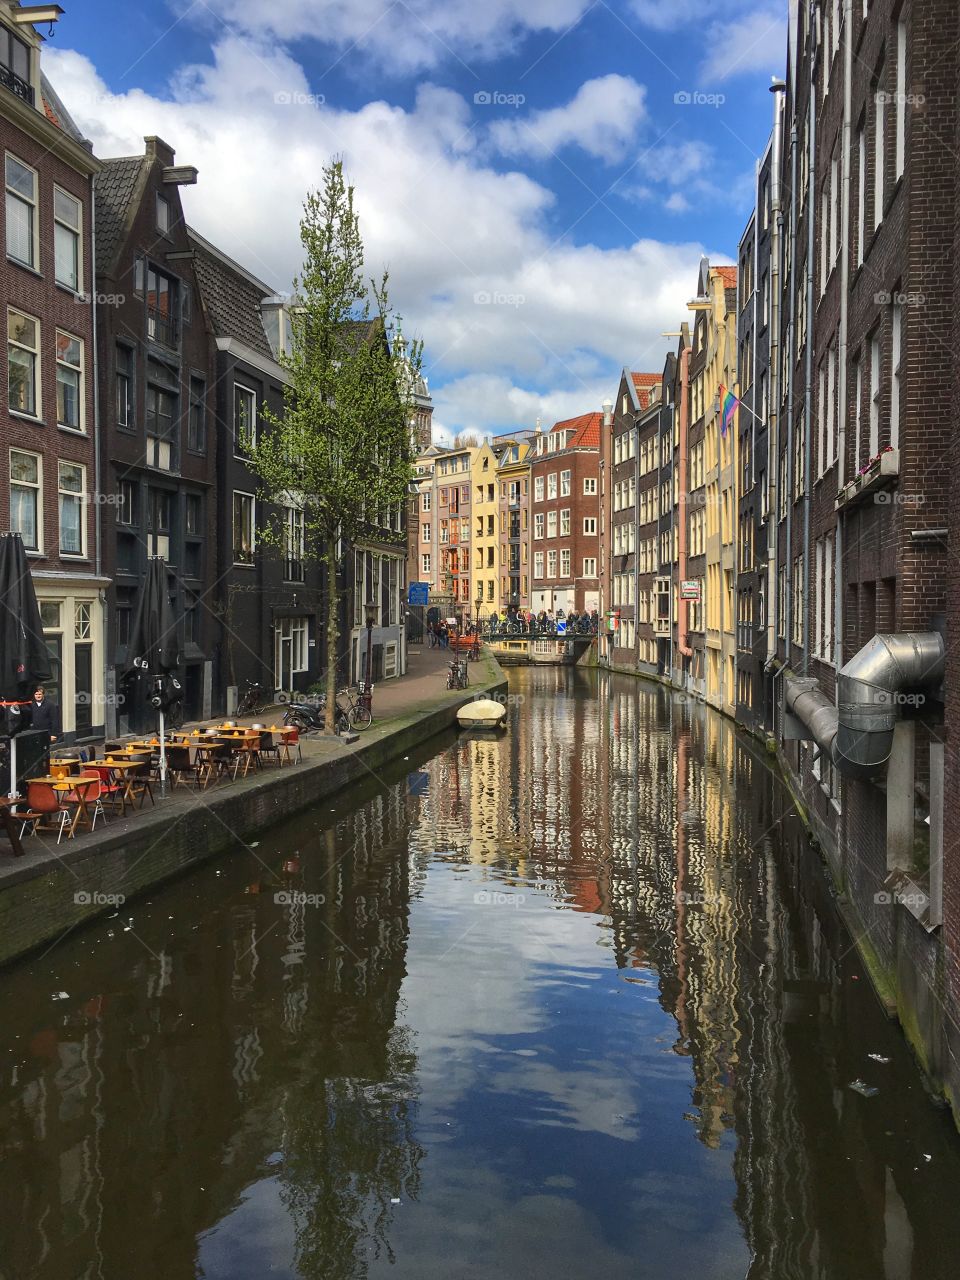 Architecture, City, No Person, Canal, Street